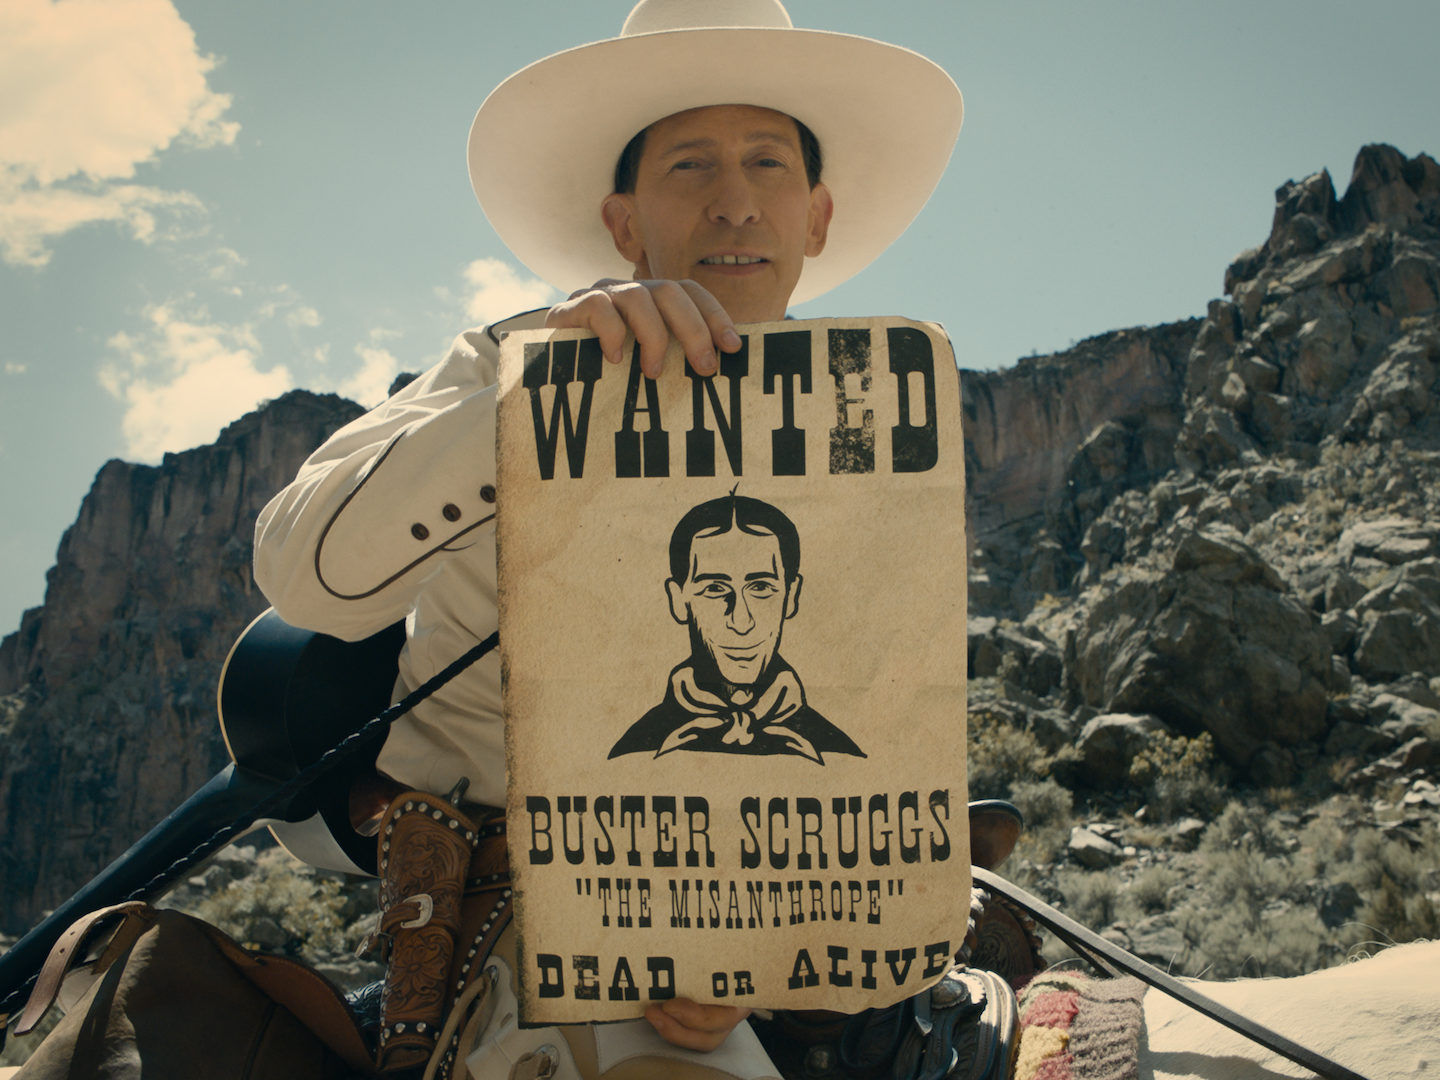 THE BALLAD OF BUSTER SCRUGGS